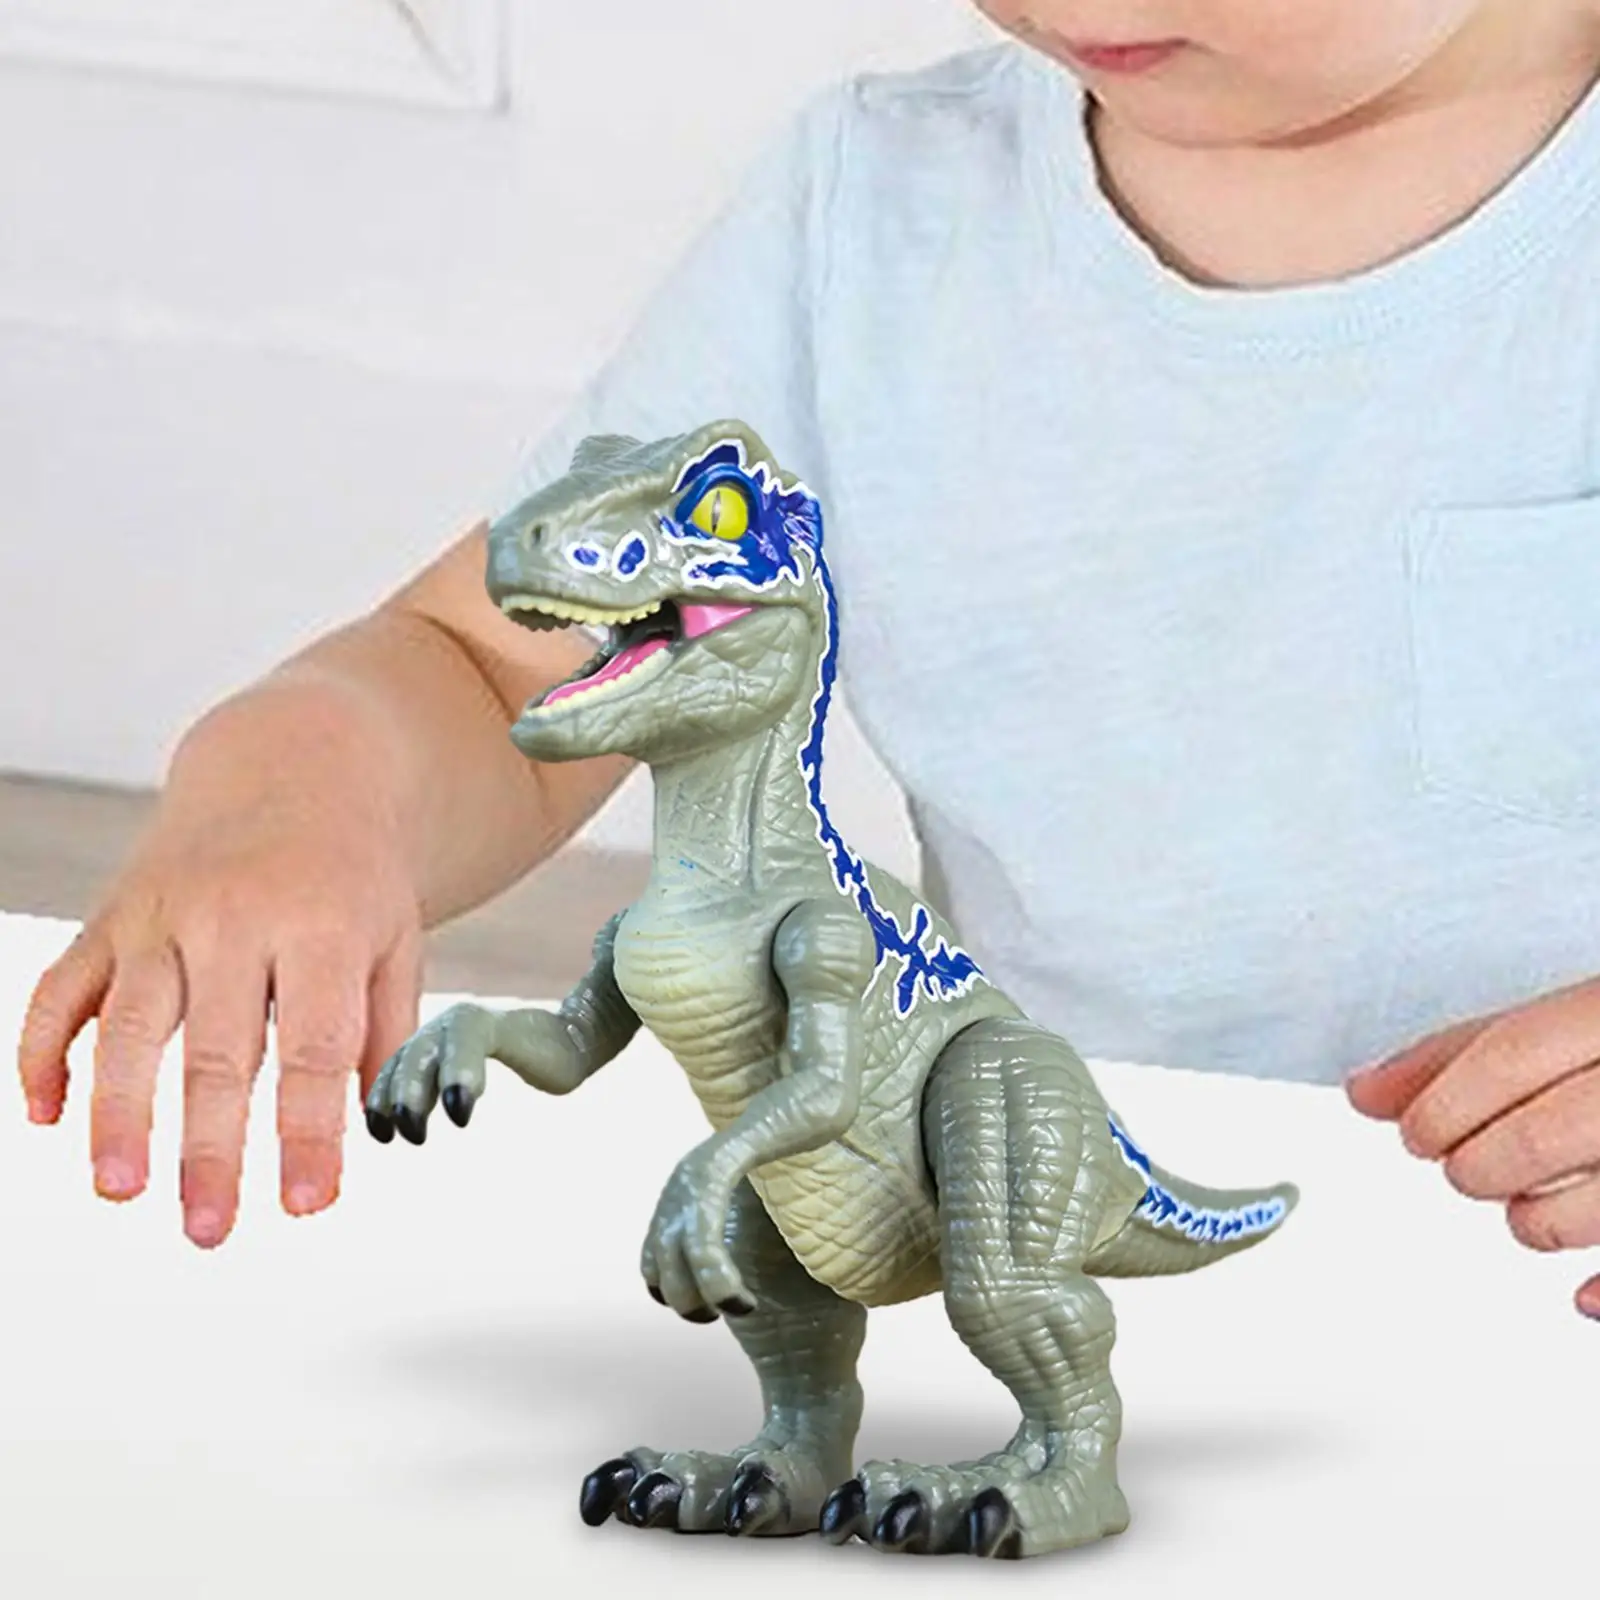 Dinosaur Figure Toy Animal Figurine Model, Realistic Figure Simulated Dinosaur Toy, Movable Joints for Party Favors Gift Cars